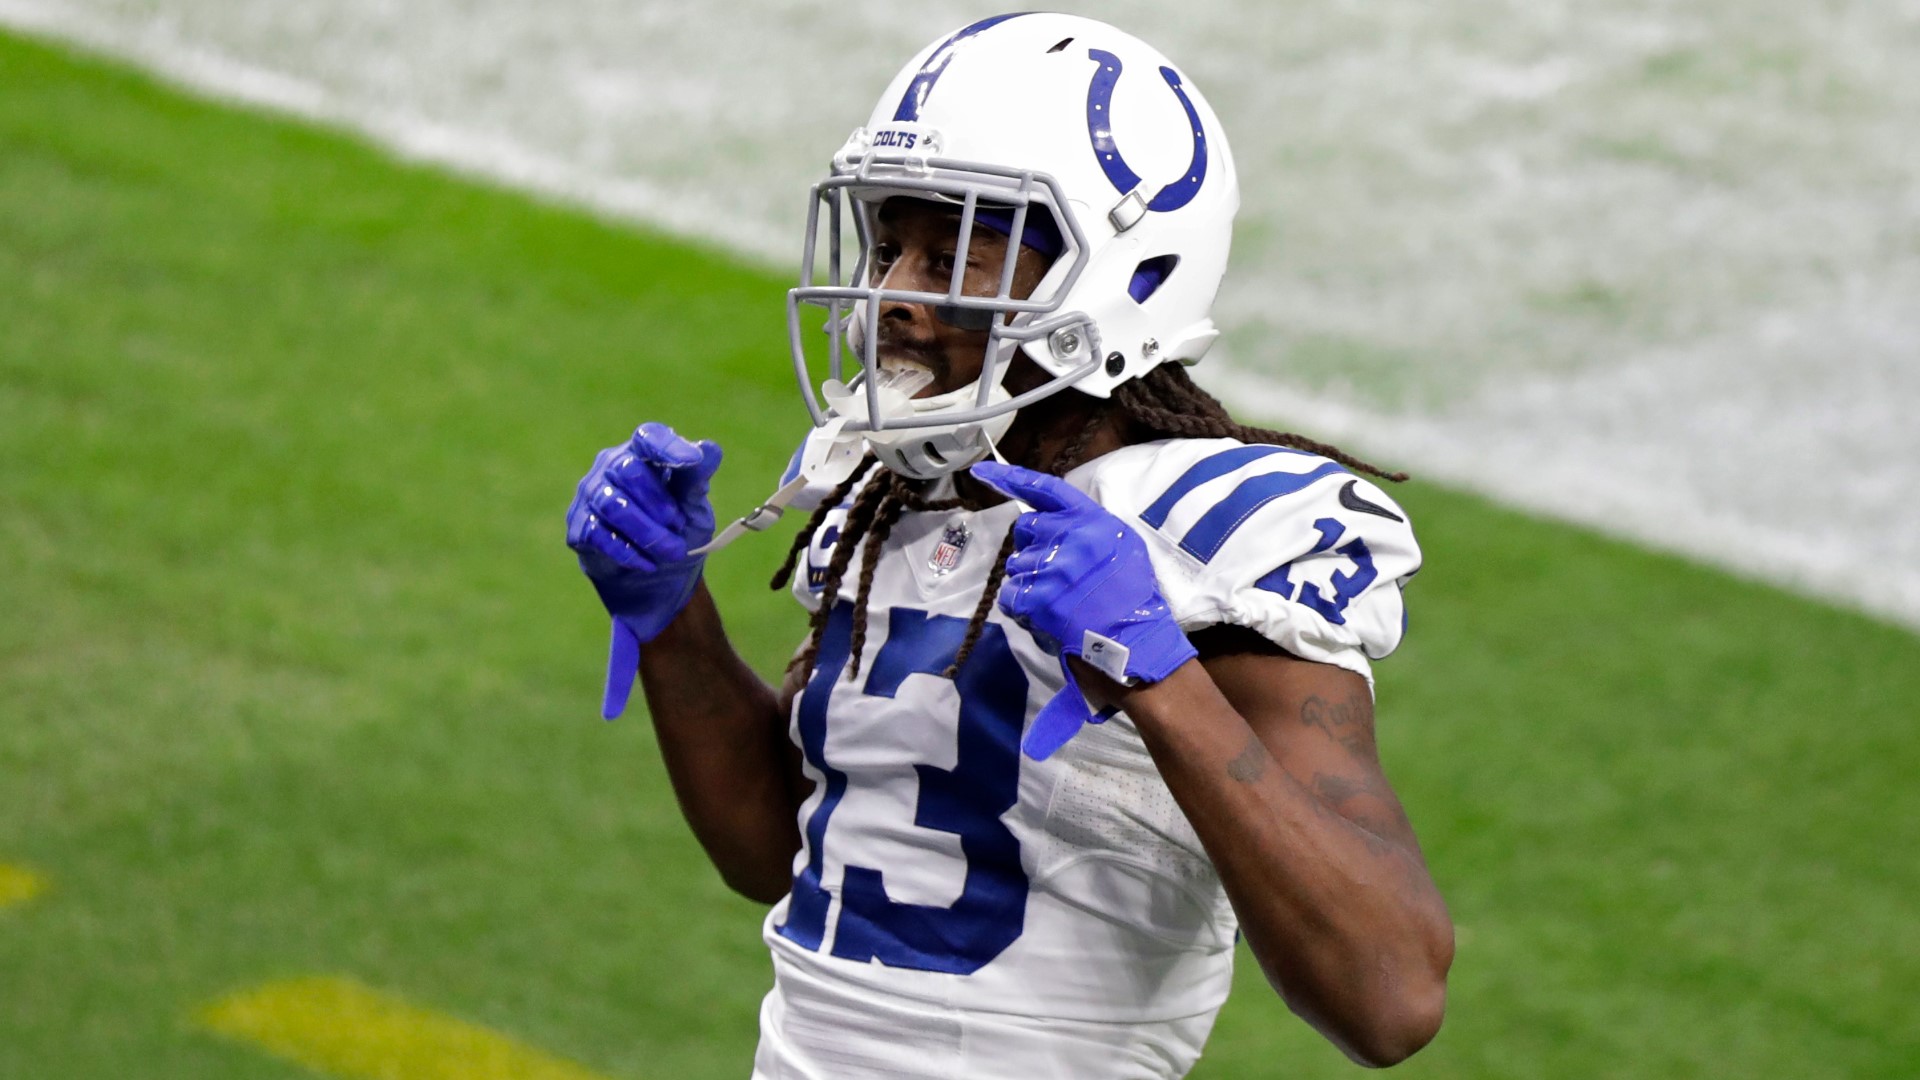 Colts wide receiver T.Y. Hilton said he plans to return to the team for one year.